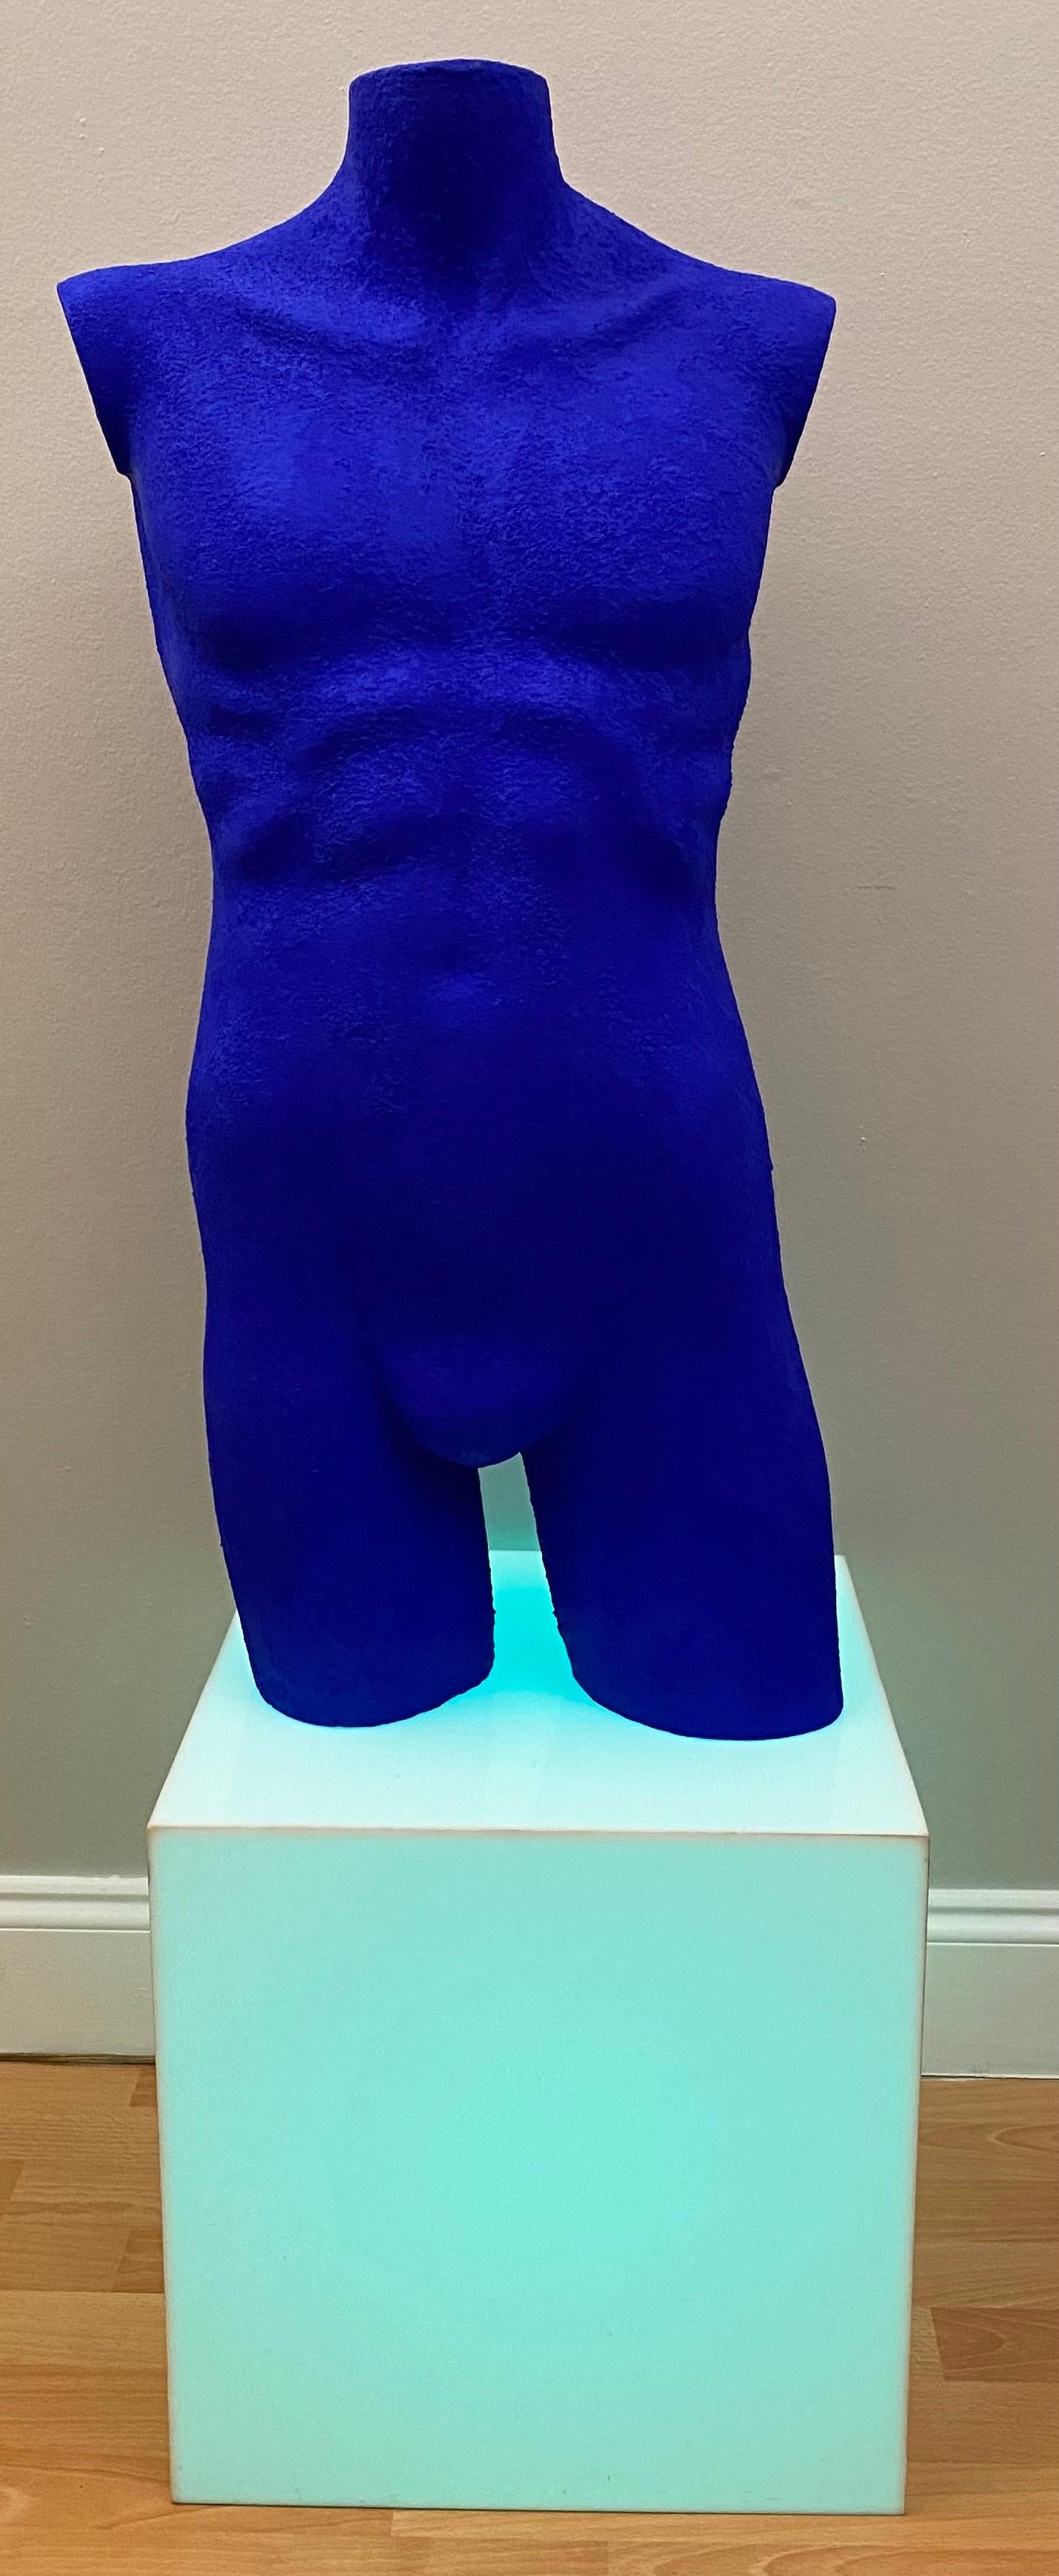 Modern nude male sculpture made of solid Lucite and finished in the manner of Yves Klein's blue pieces of art. This particular shade of blue, called IKB (International Klein Blue), was developed and patented by Klein himself.

This figurative